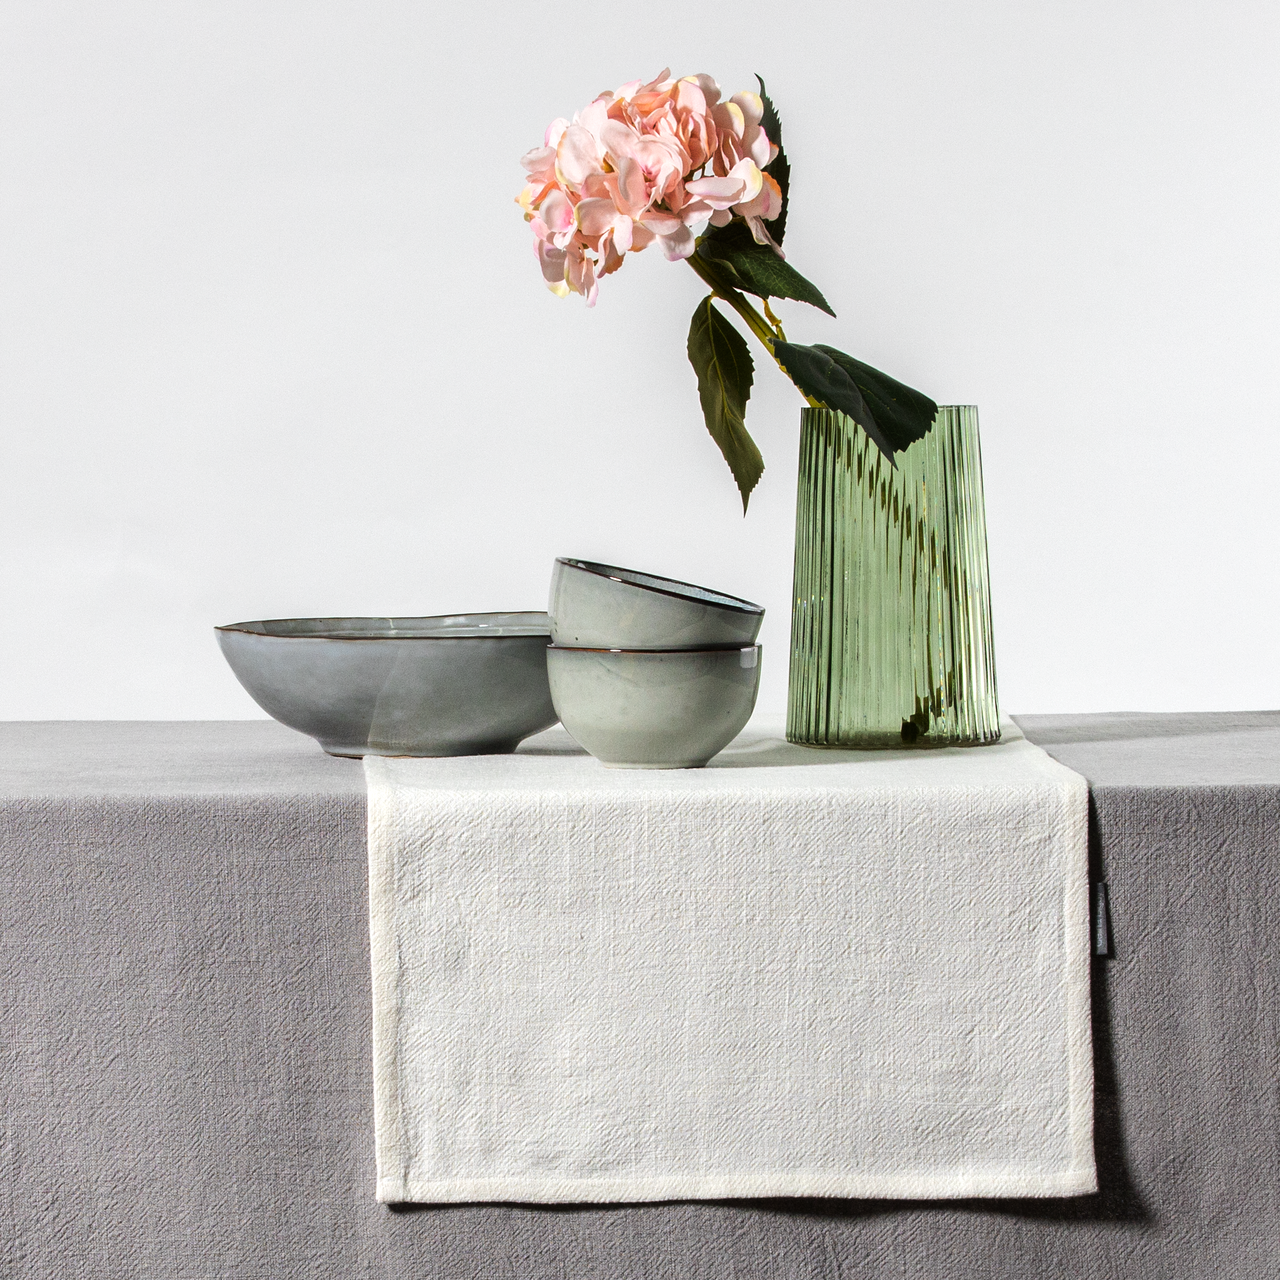 Celina Digby Luxury Stonewashed 100% Linen Table Runner – Available in 3 Sizes Ivory (Off White) RUNNER 300 x 35cm